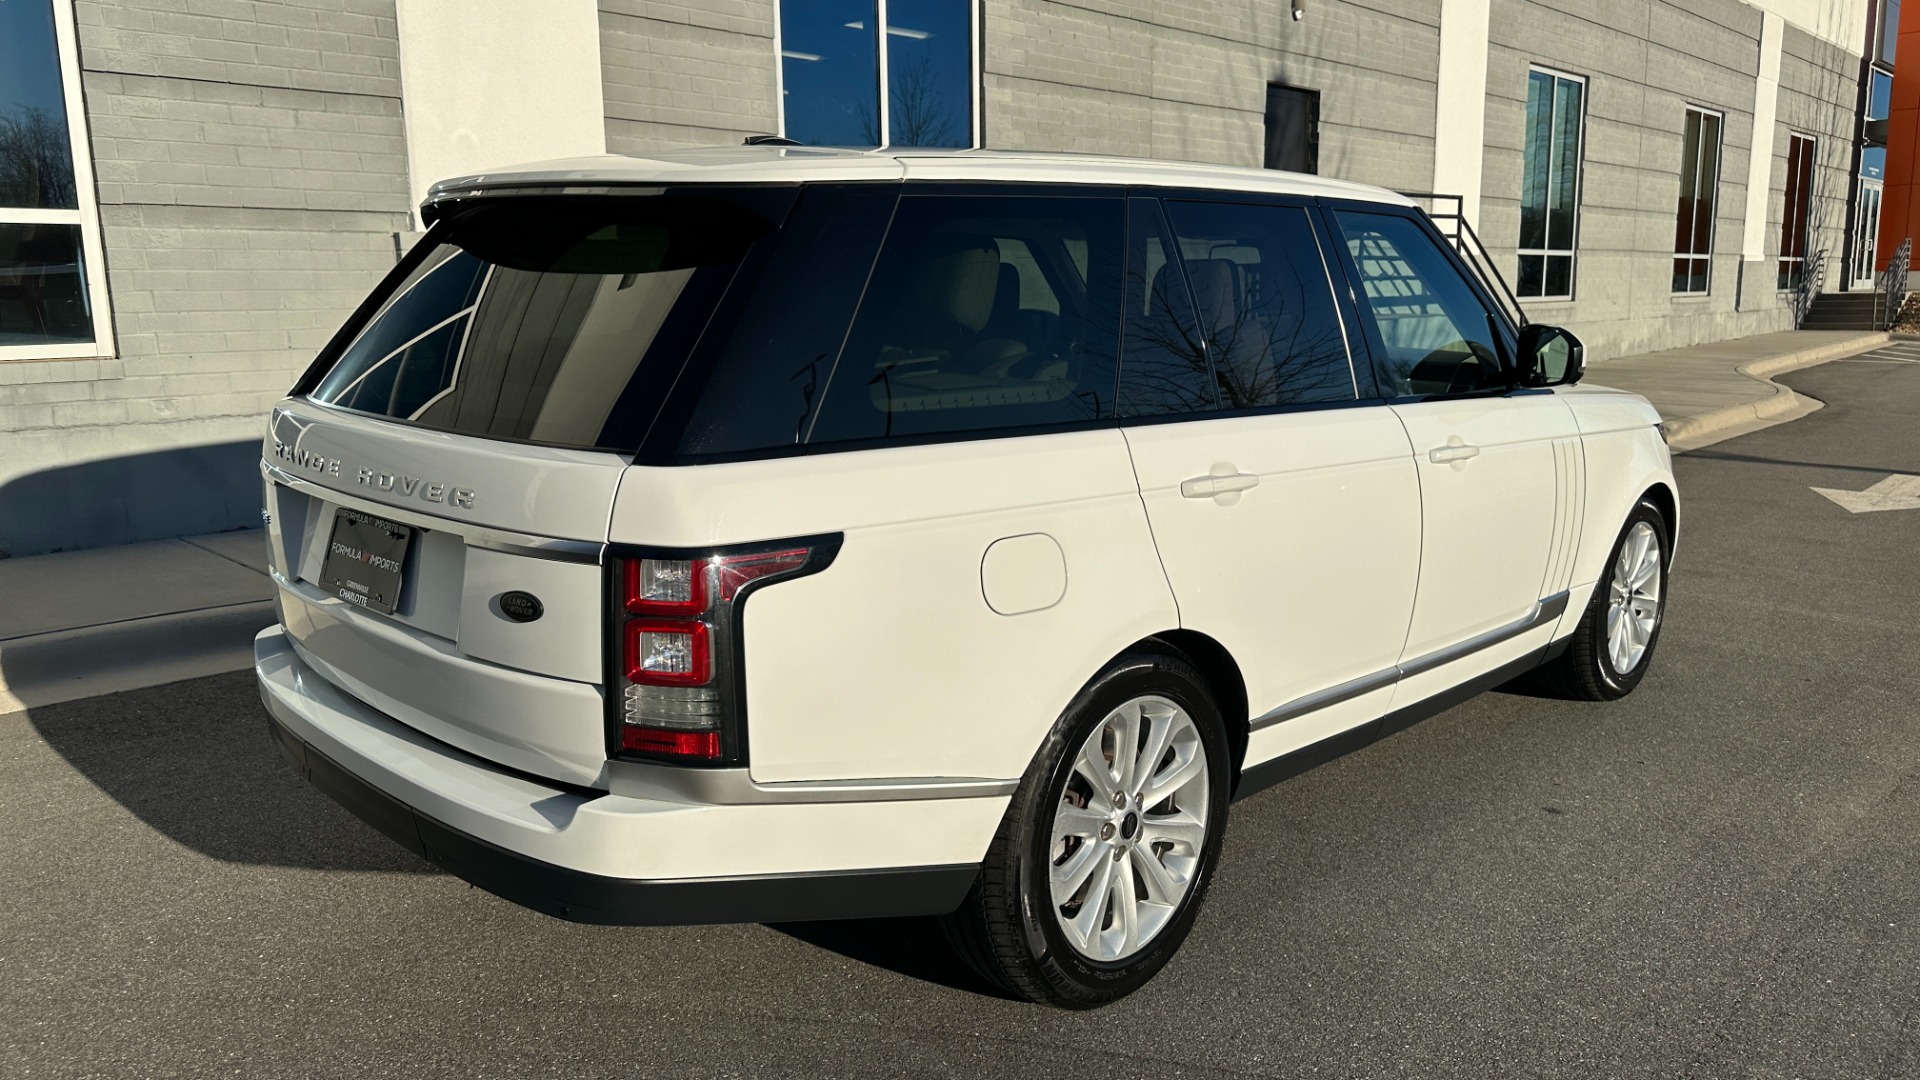 Used 2013 Land Rover Range Rover HSE / MERIDIAN SOUND / TOW PACK / VISION ASSIST / CLIMATE COMFORT for sale $30,995 at Formula Imports in Charlotte NC 28227 7